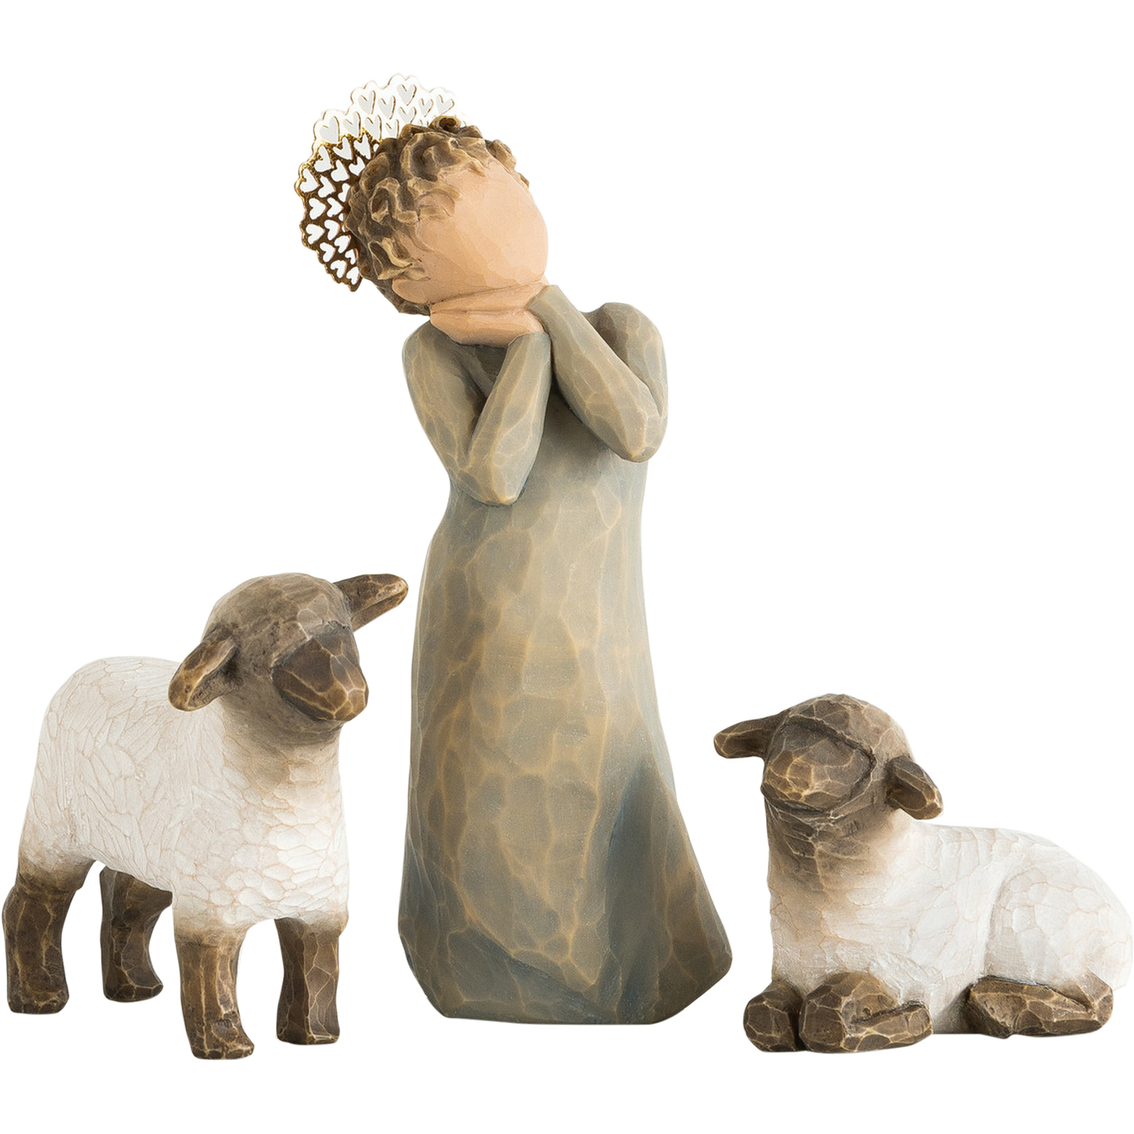 Willow Tree Little Shepherdess for Nativity Figurines - Image 1 of 3